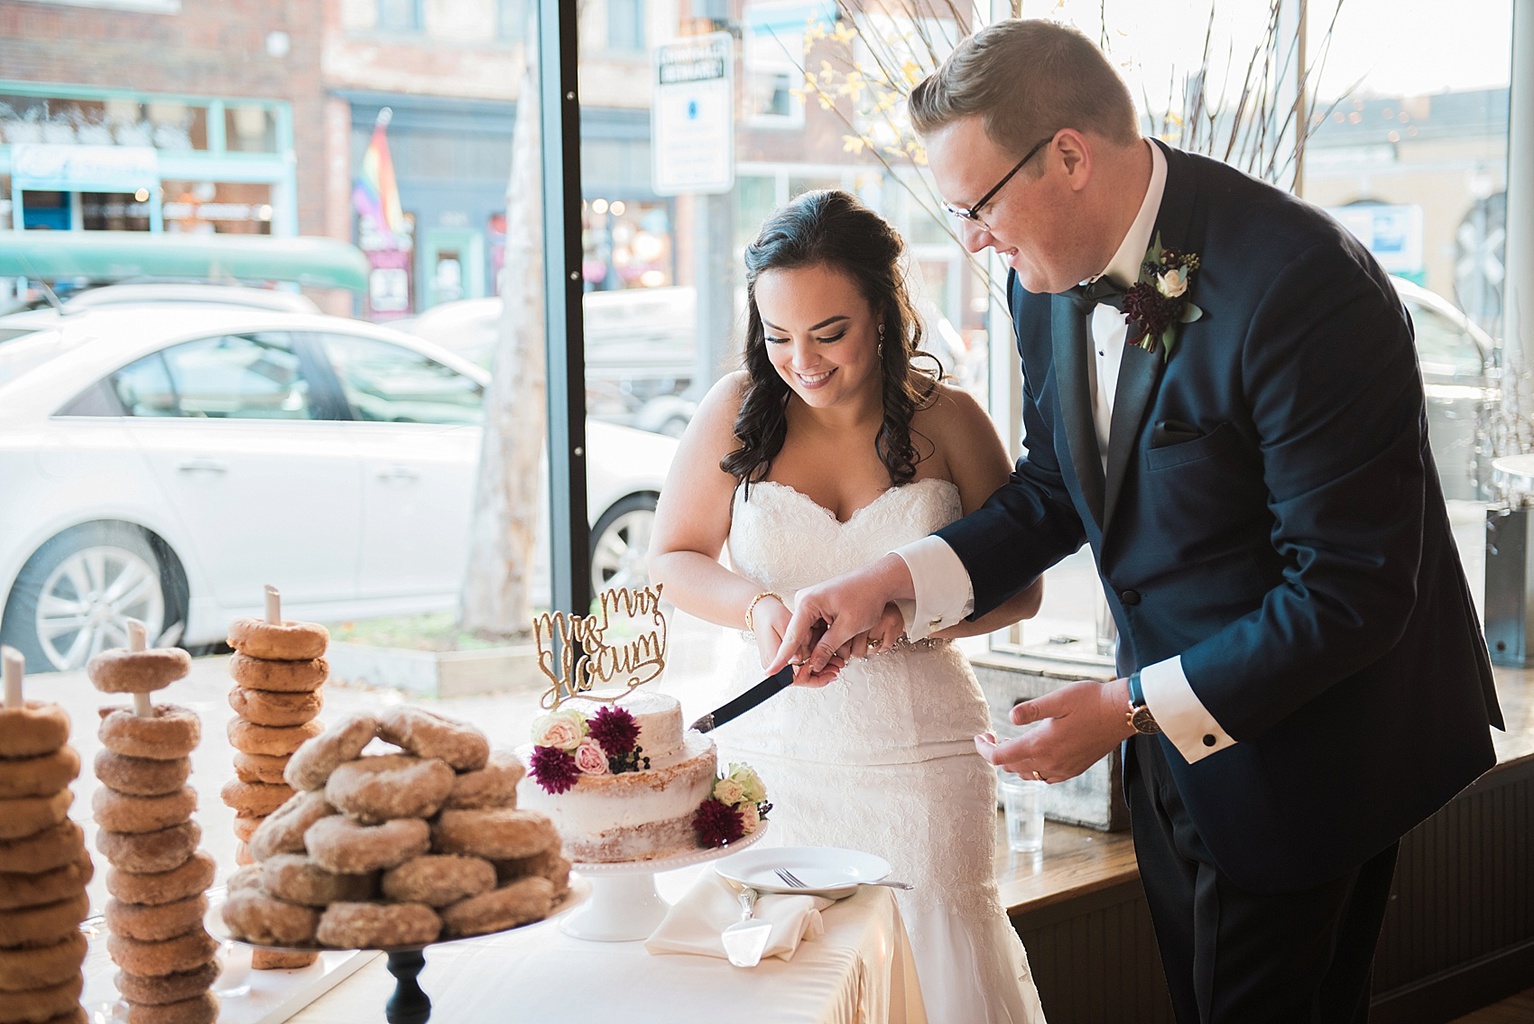 Lansing wedding venues: Old Town Marquee wedding reception photos (cake cutting)